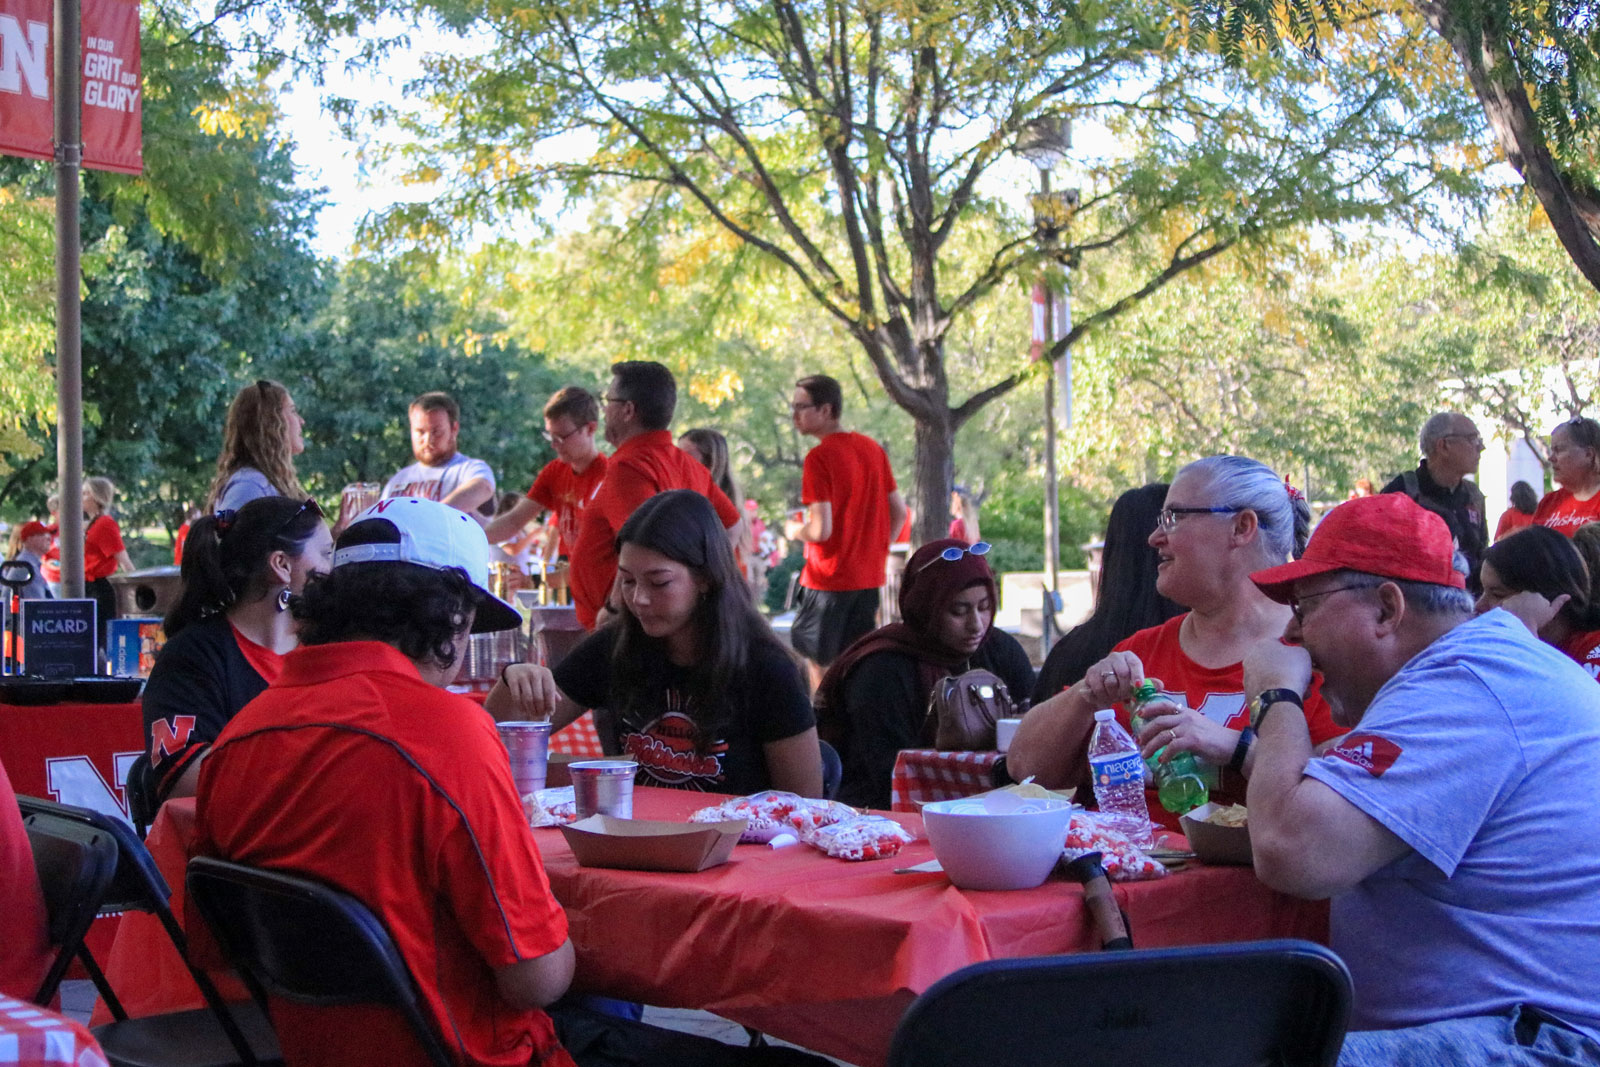 Attendees enjoy tailgate snacks at sober tailgate event